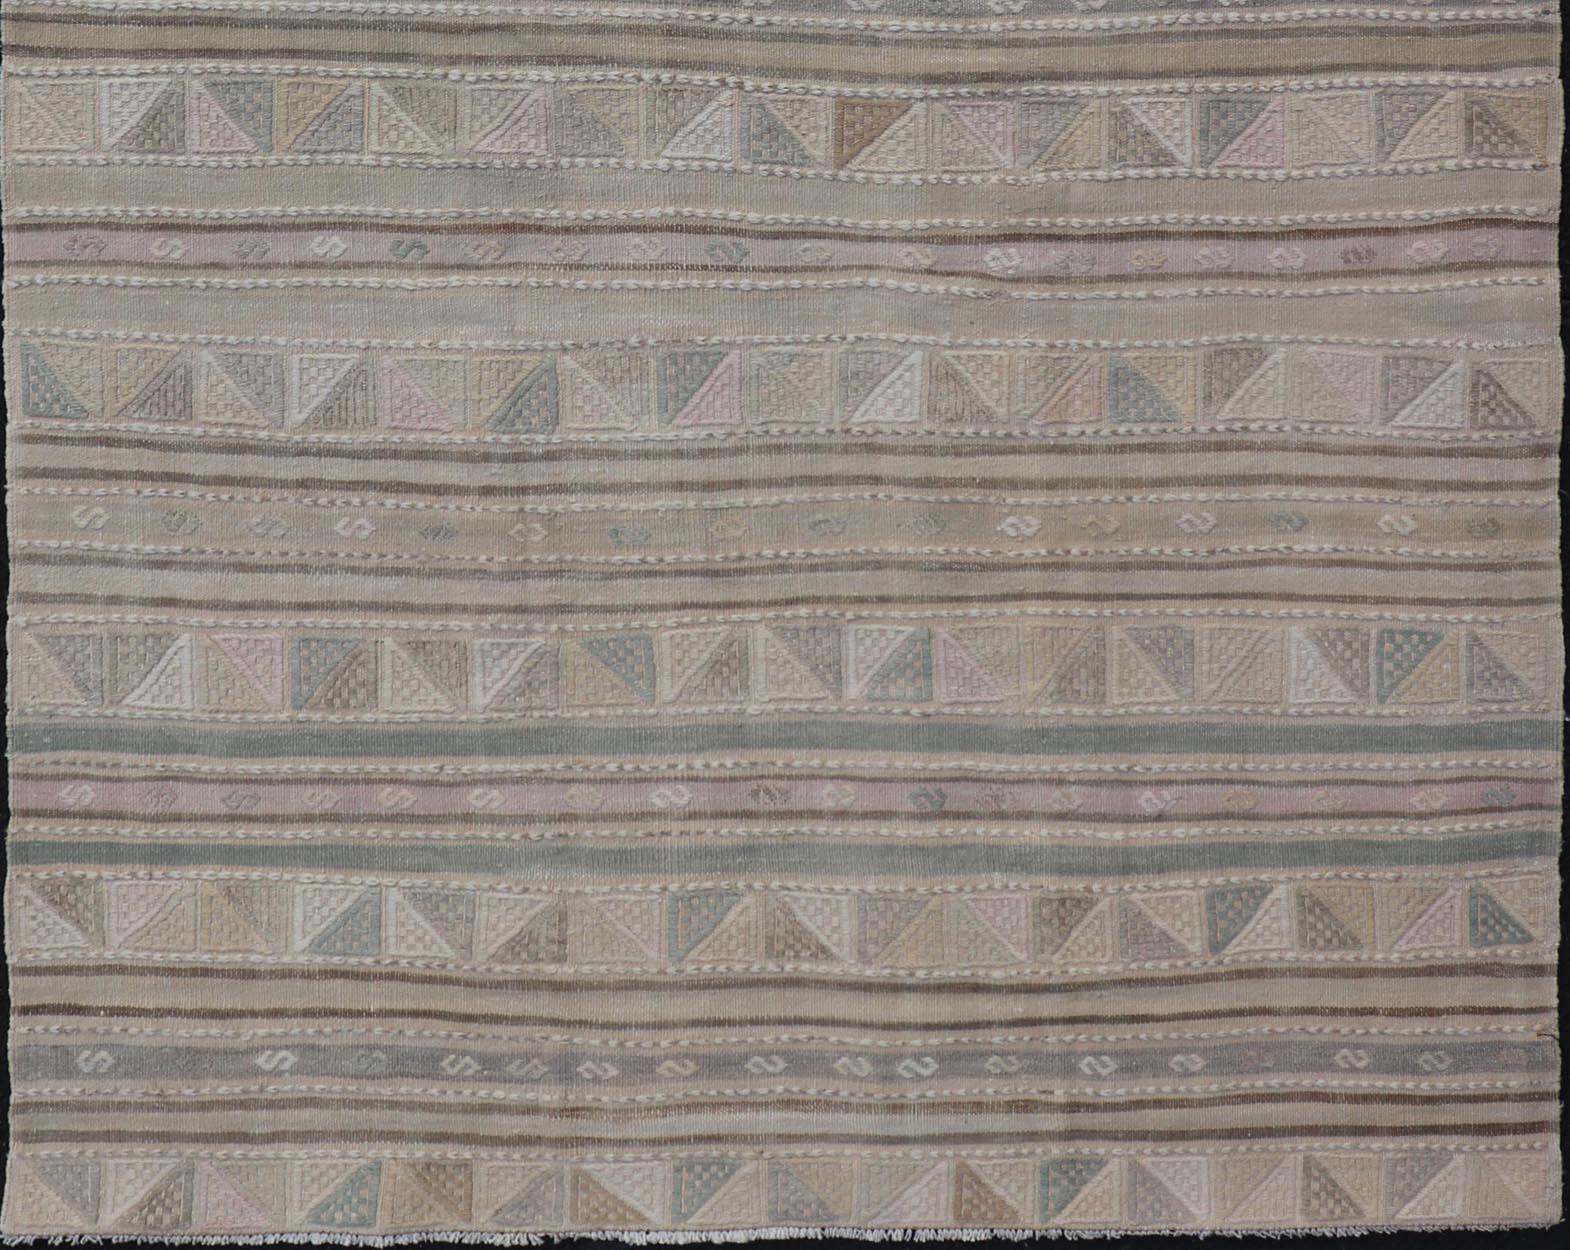 Vintage flat-weave Kilim with embroideries with a modern design in tan, brown, green and tan. geometric stripe design Vintage Kilim from Turkey, Keivan Woven Arts / rug EN-P13936, country of origin / type: Turkey / Kilim, circa 1950

Measures: 4'7 x